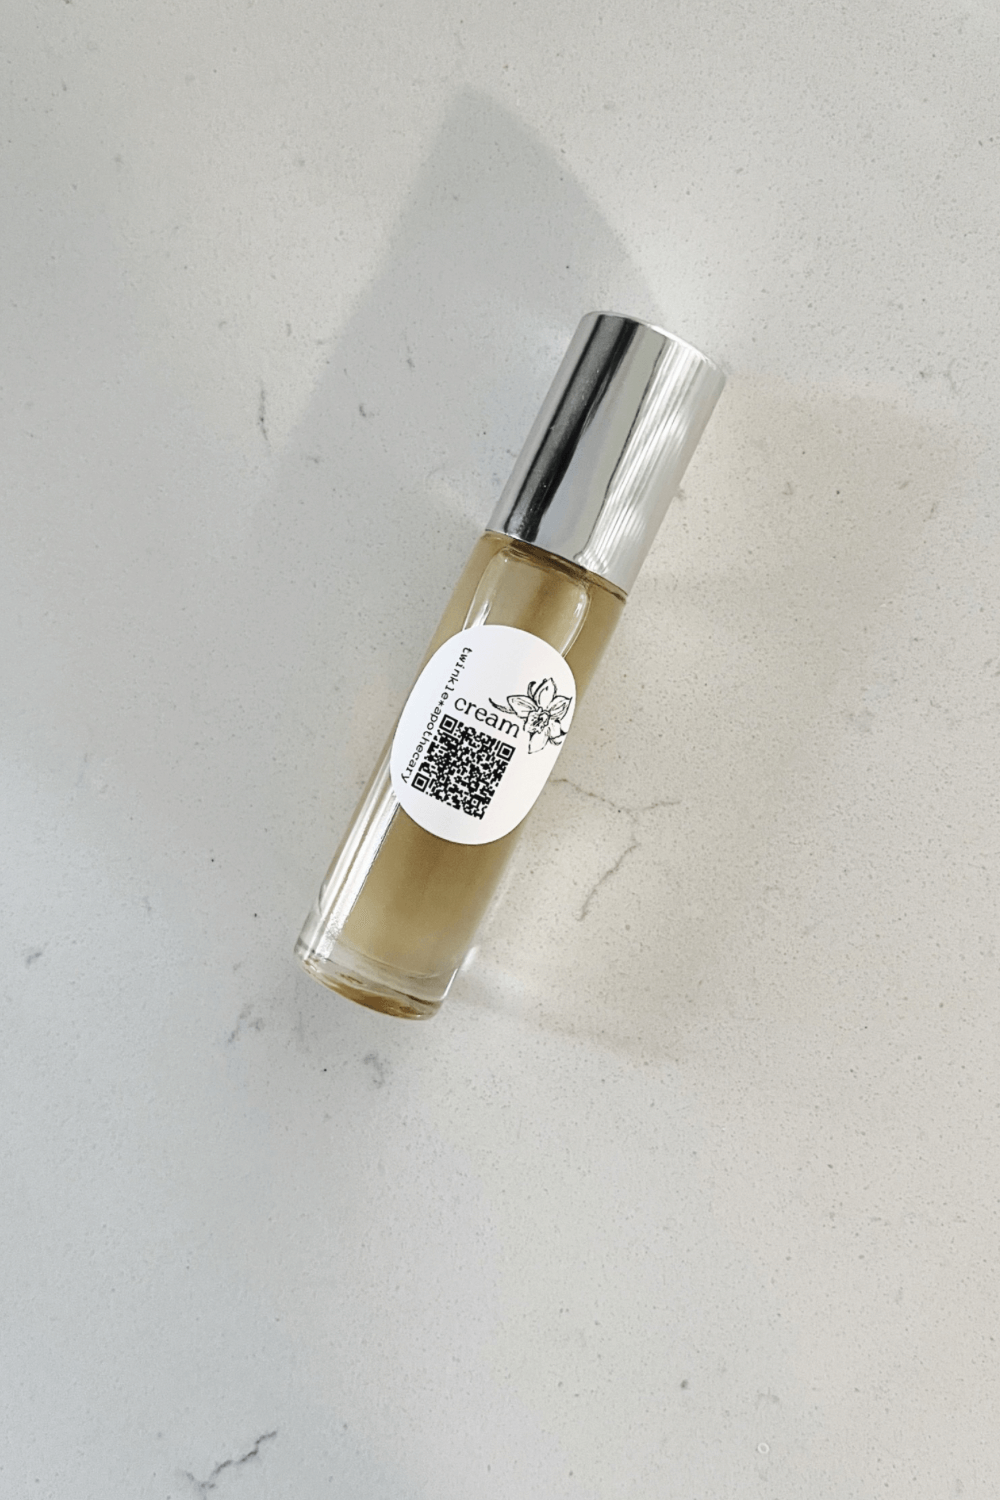 10 ml oil based roll on of twinkle apothecary cream natural single note vanilla perfume 